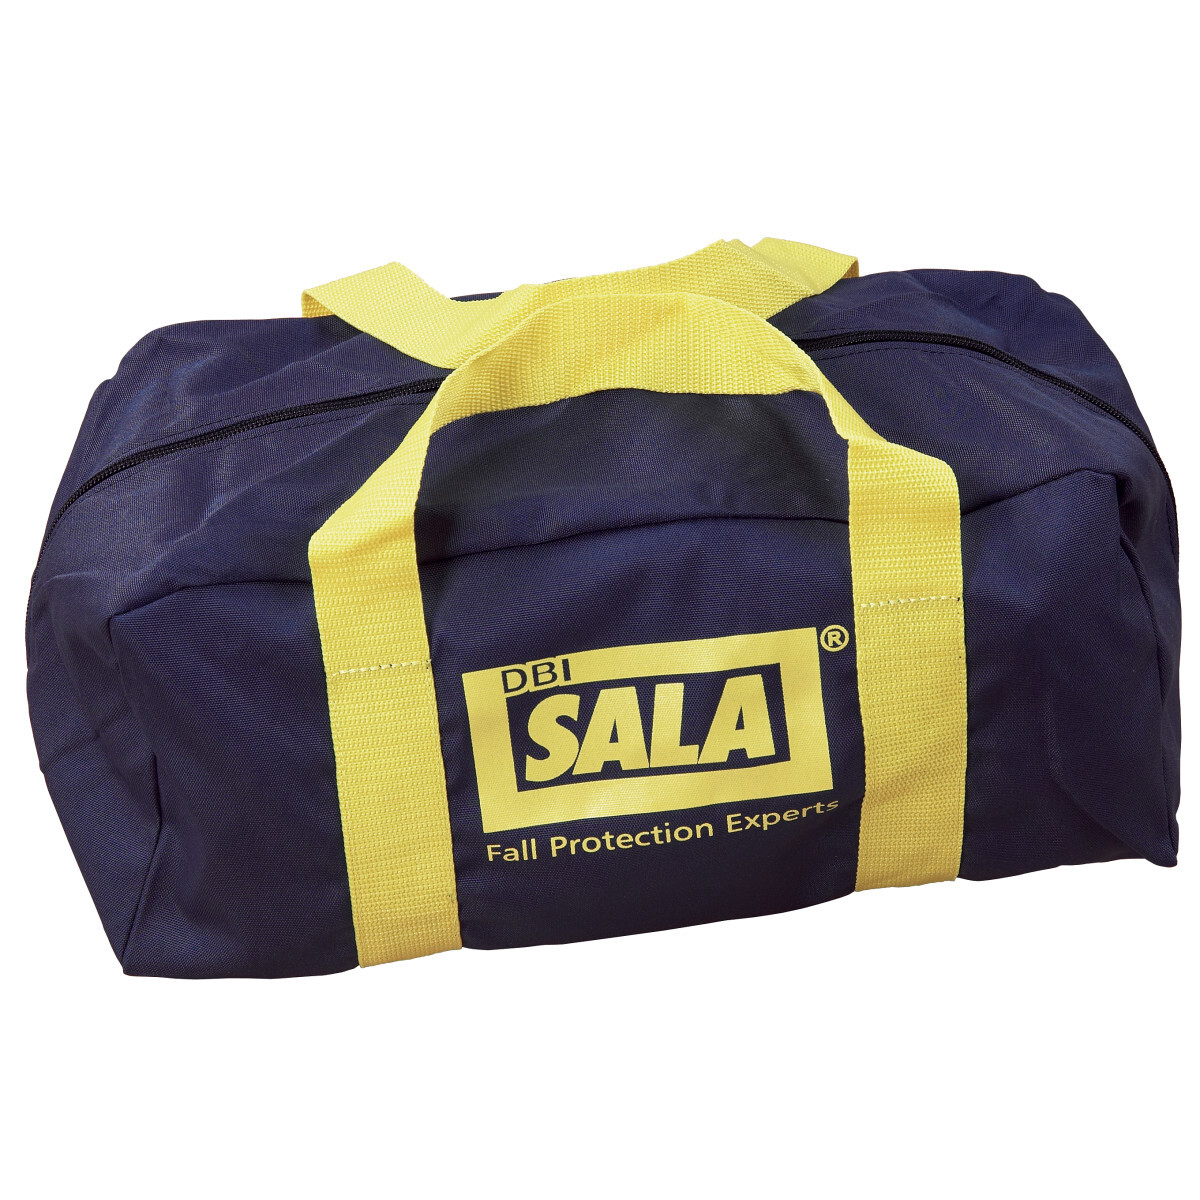 3M™ DBI-SALA® Equipment Carrying And Storage Bag 9511597, Small